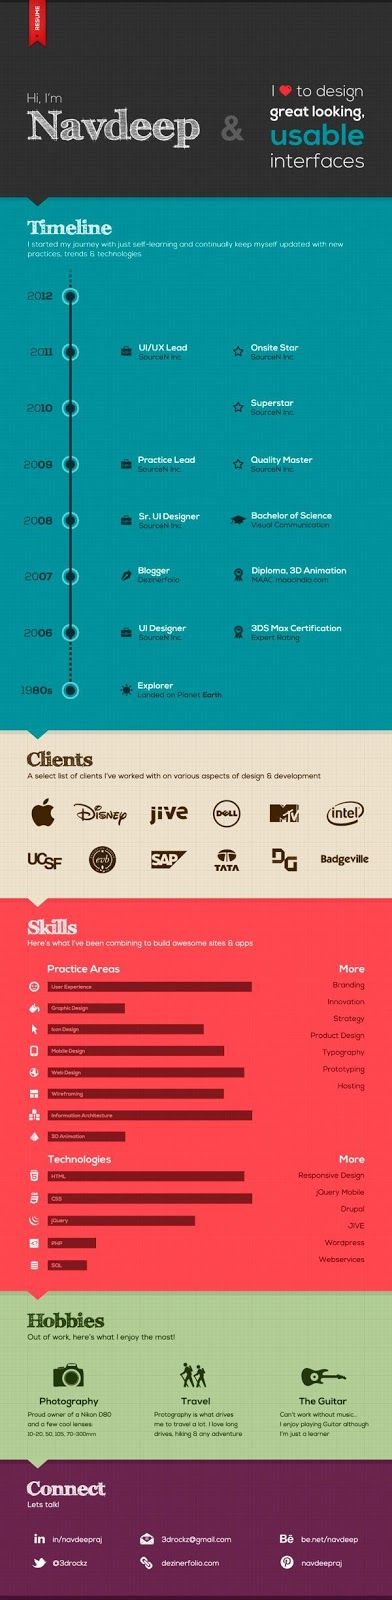 infographic resume with creative sections